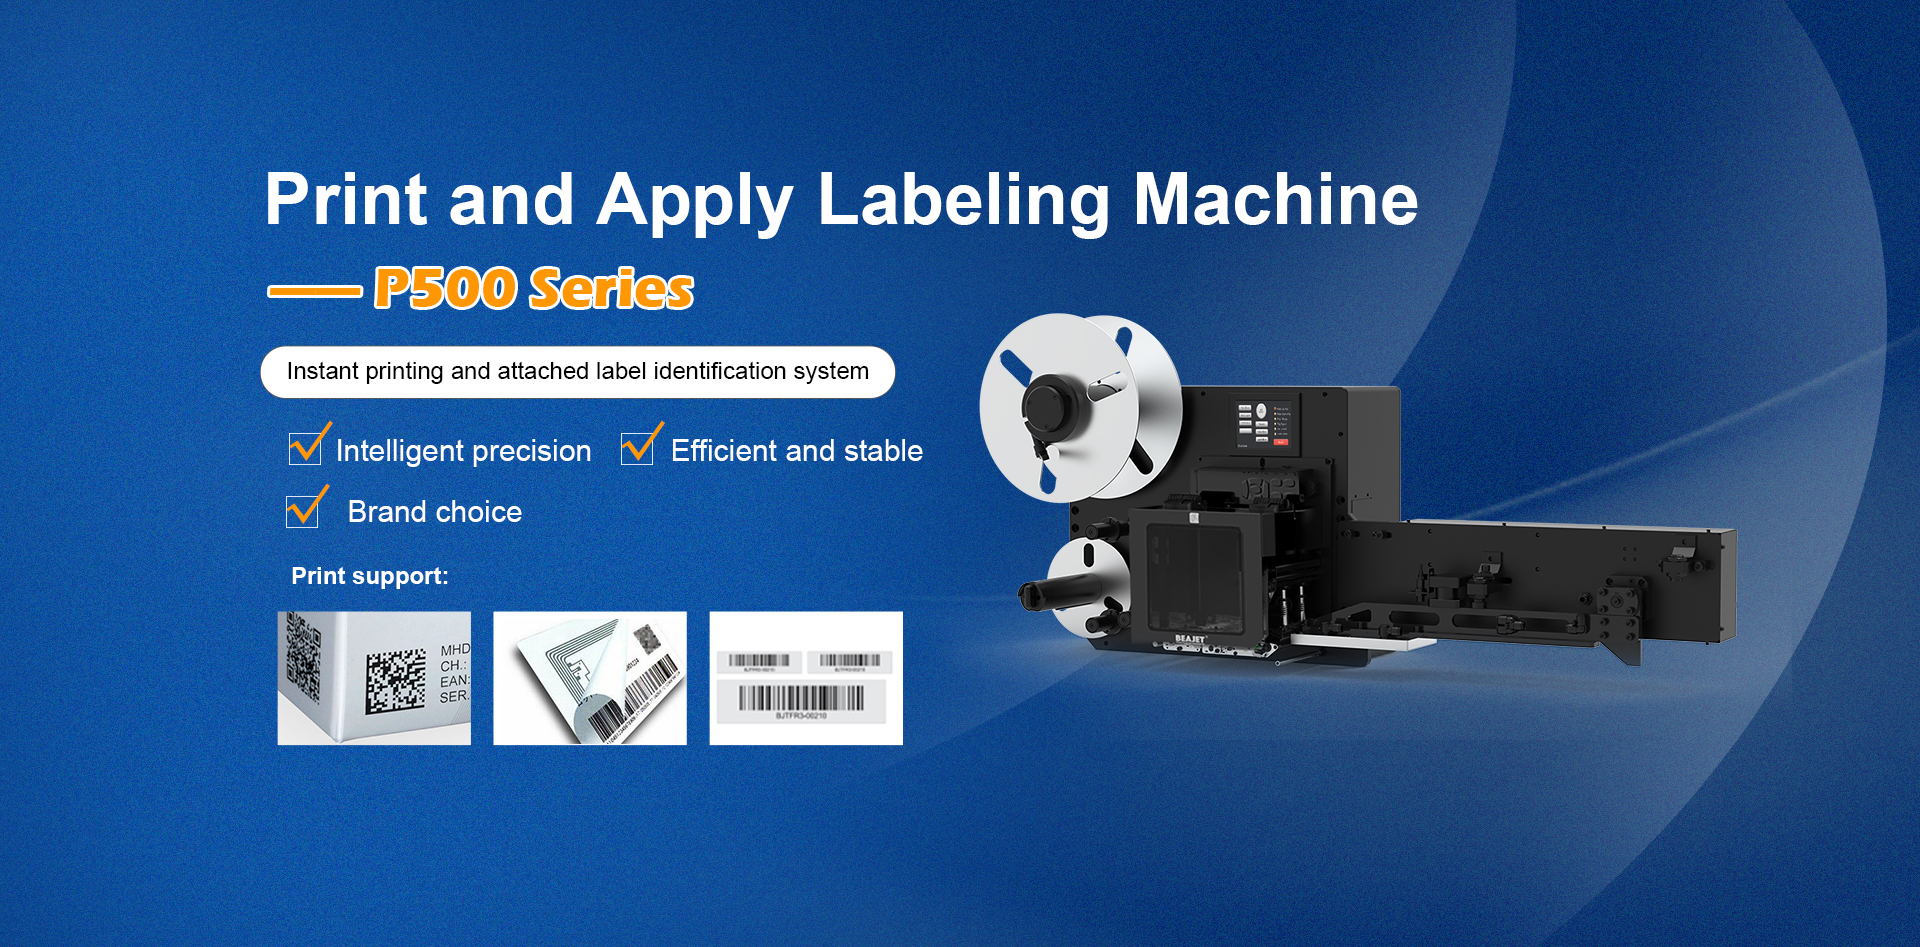 Print and Apply Labeling Machine